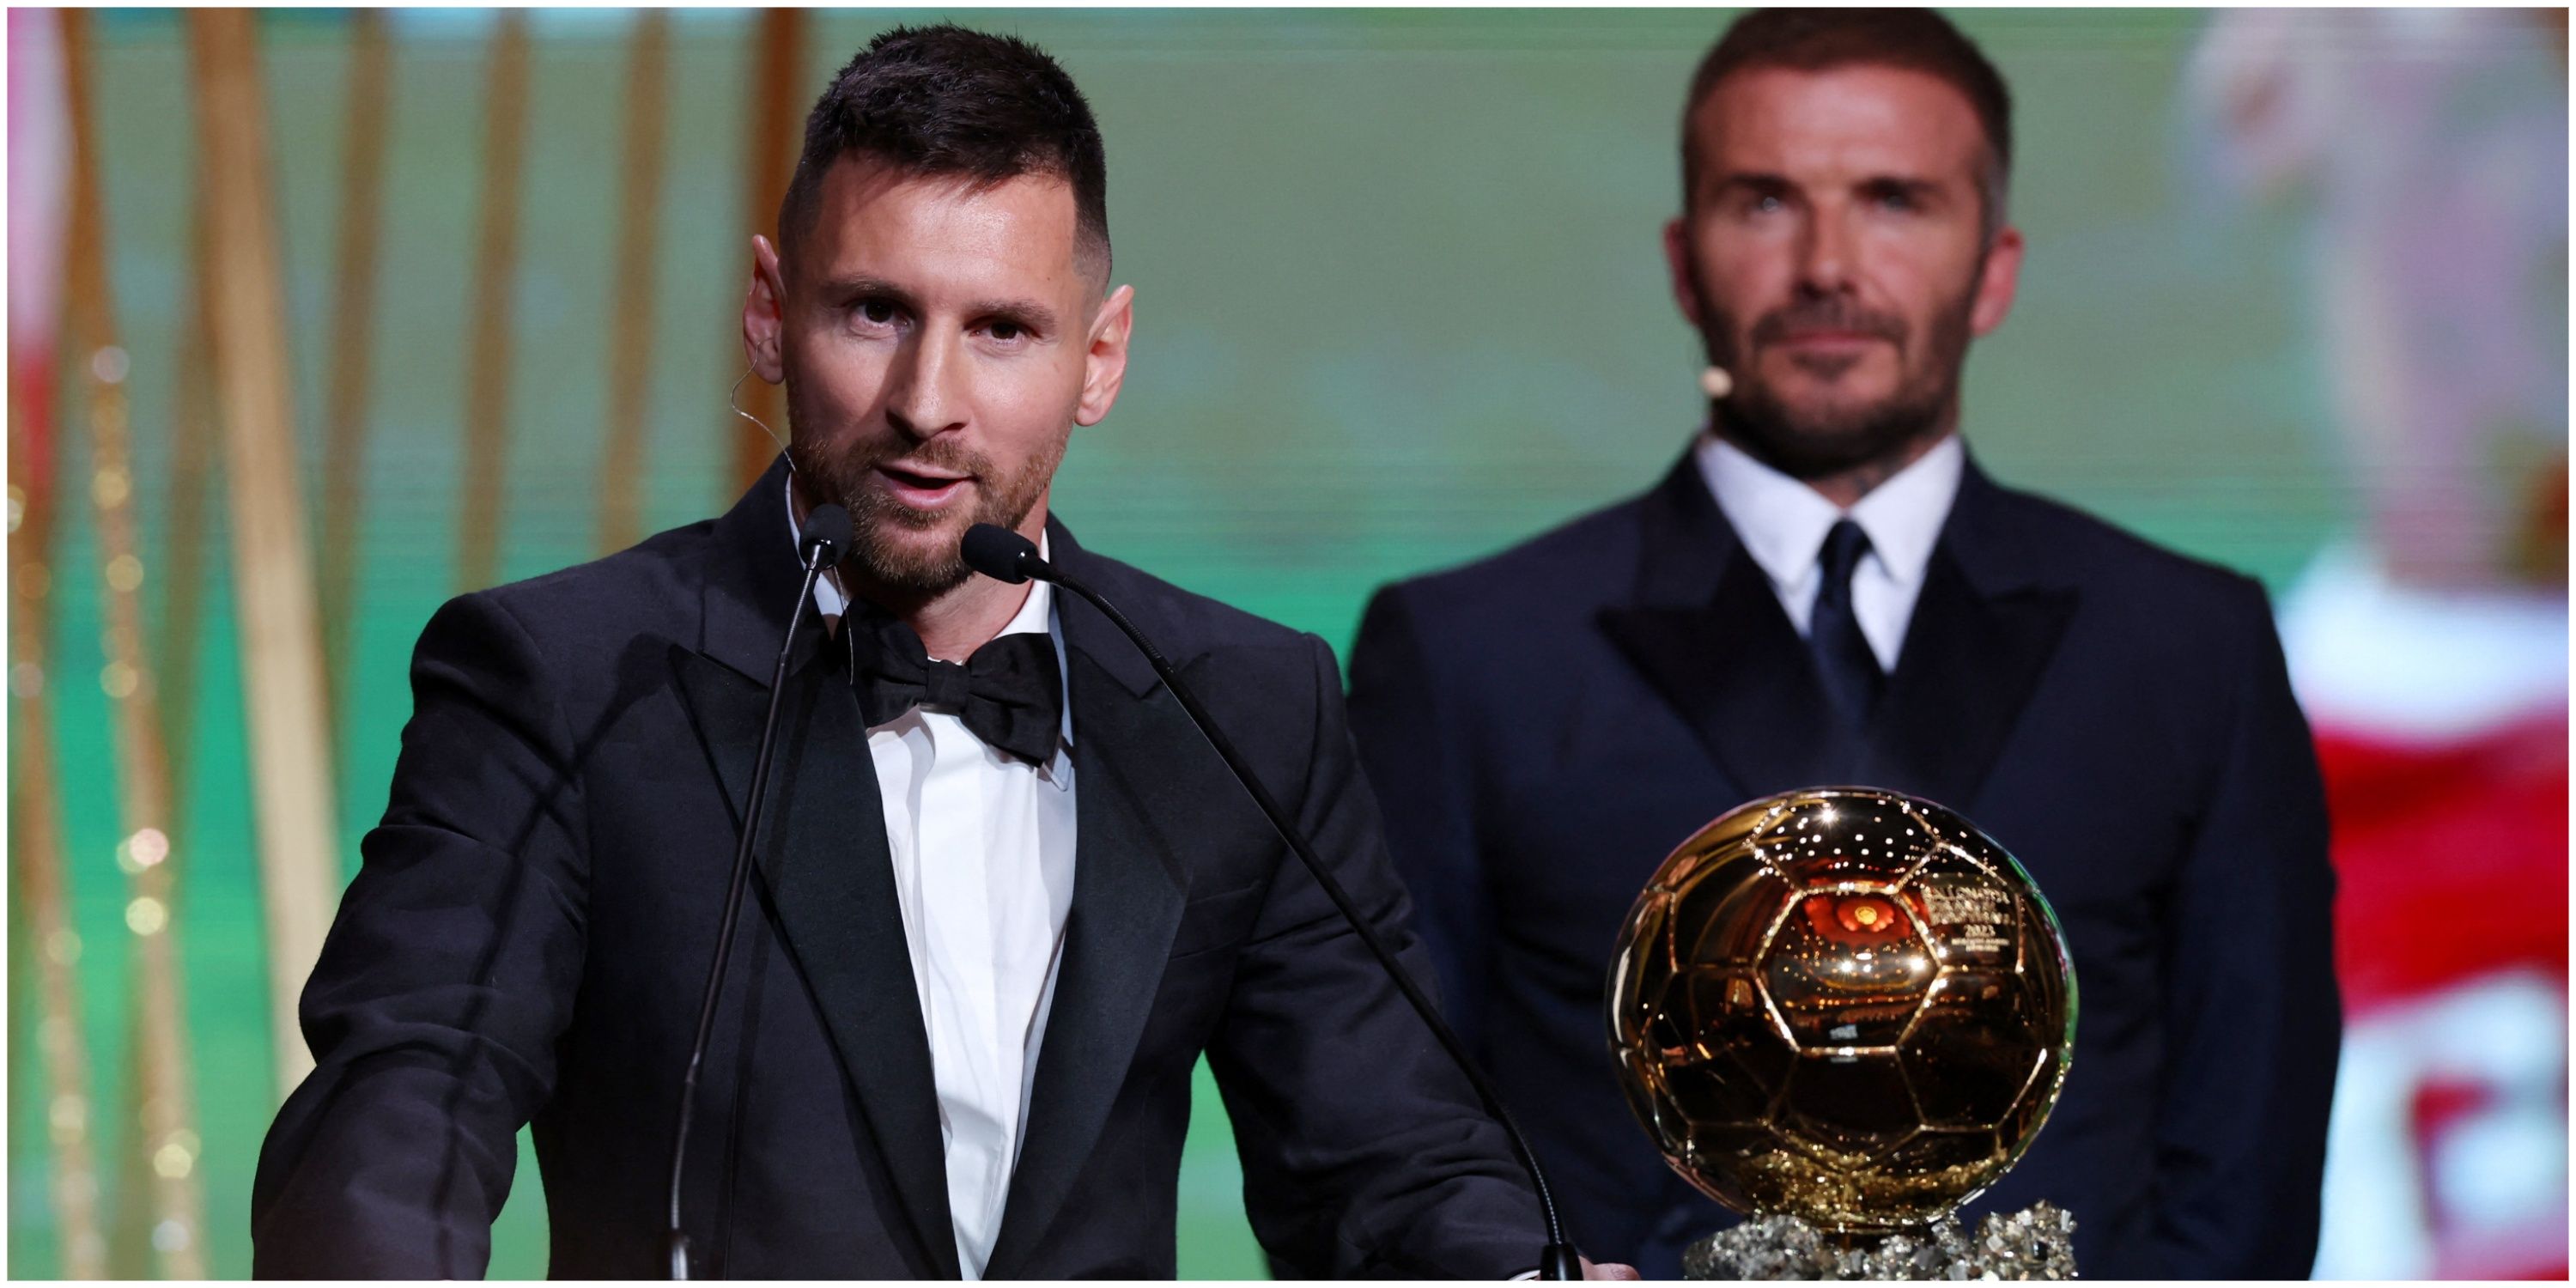 IShowSpeed completely lost it when Lionel Messi won his 8th Ballon d’Or